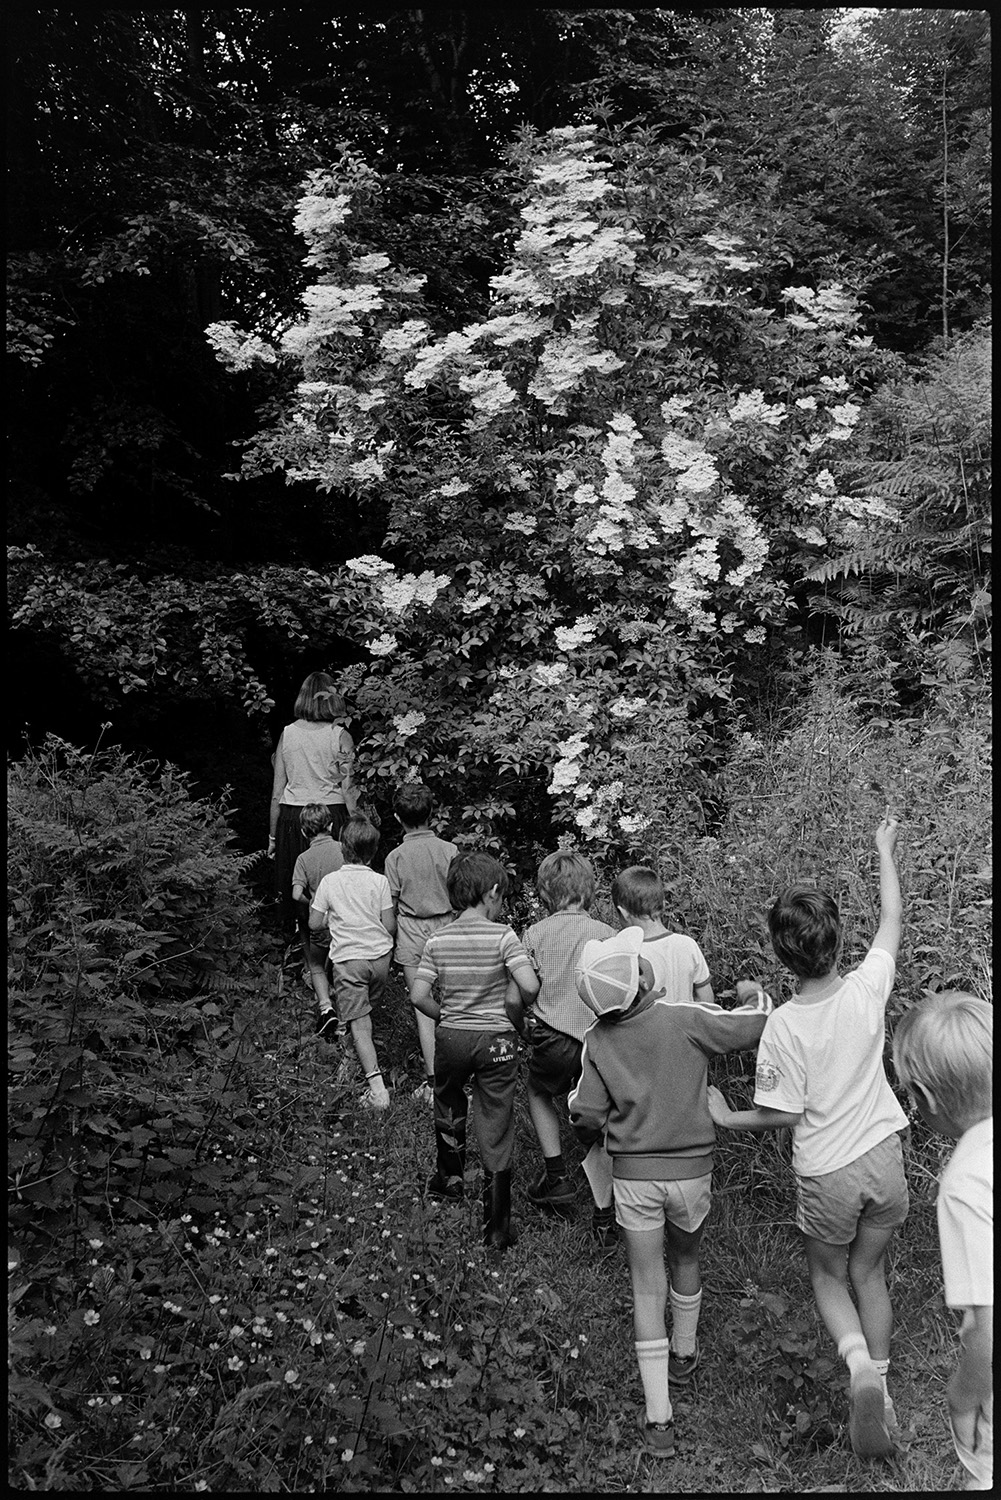 Brownies in school playground. Children in class setting off on nature walk on wood.
[Rowena Hoare, teacher at Chulmleigh Primary School, leading children on a nature walk along a path with blossom and wild flowers in Chulmleigh.]